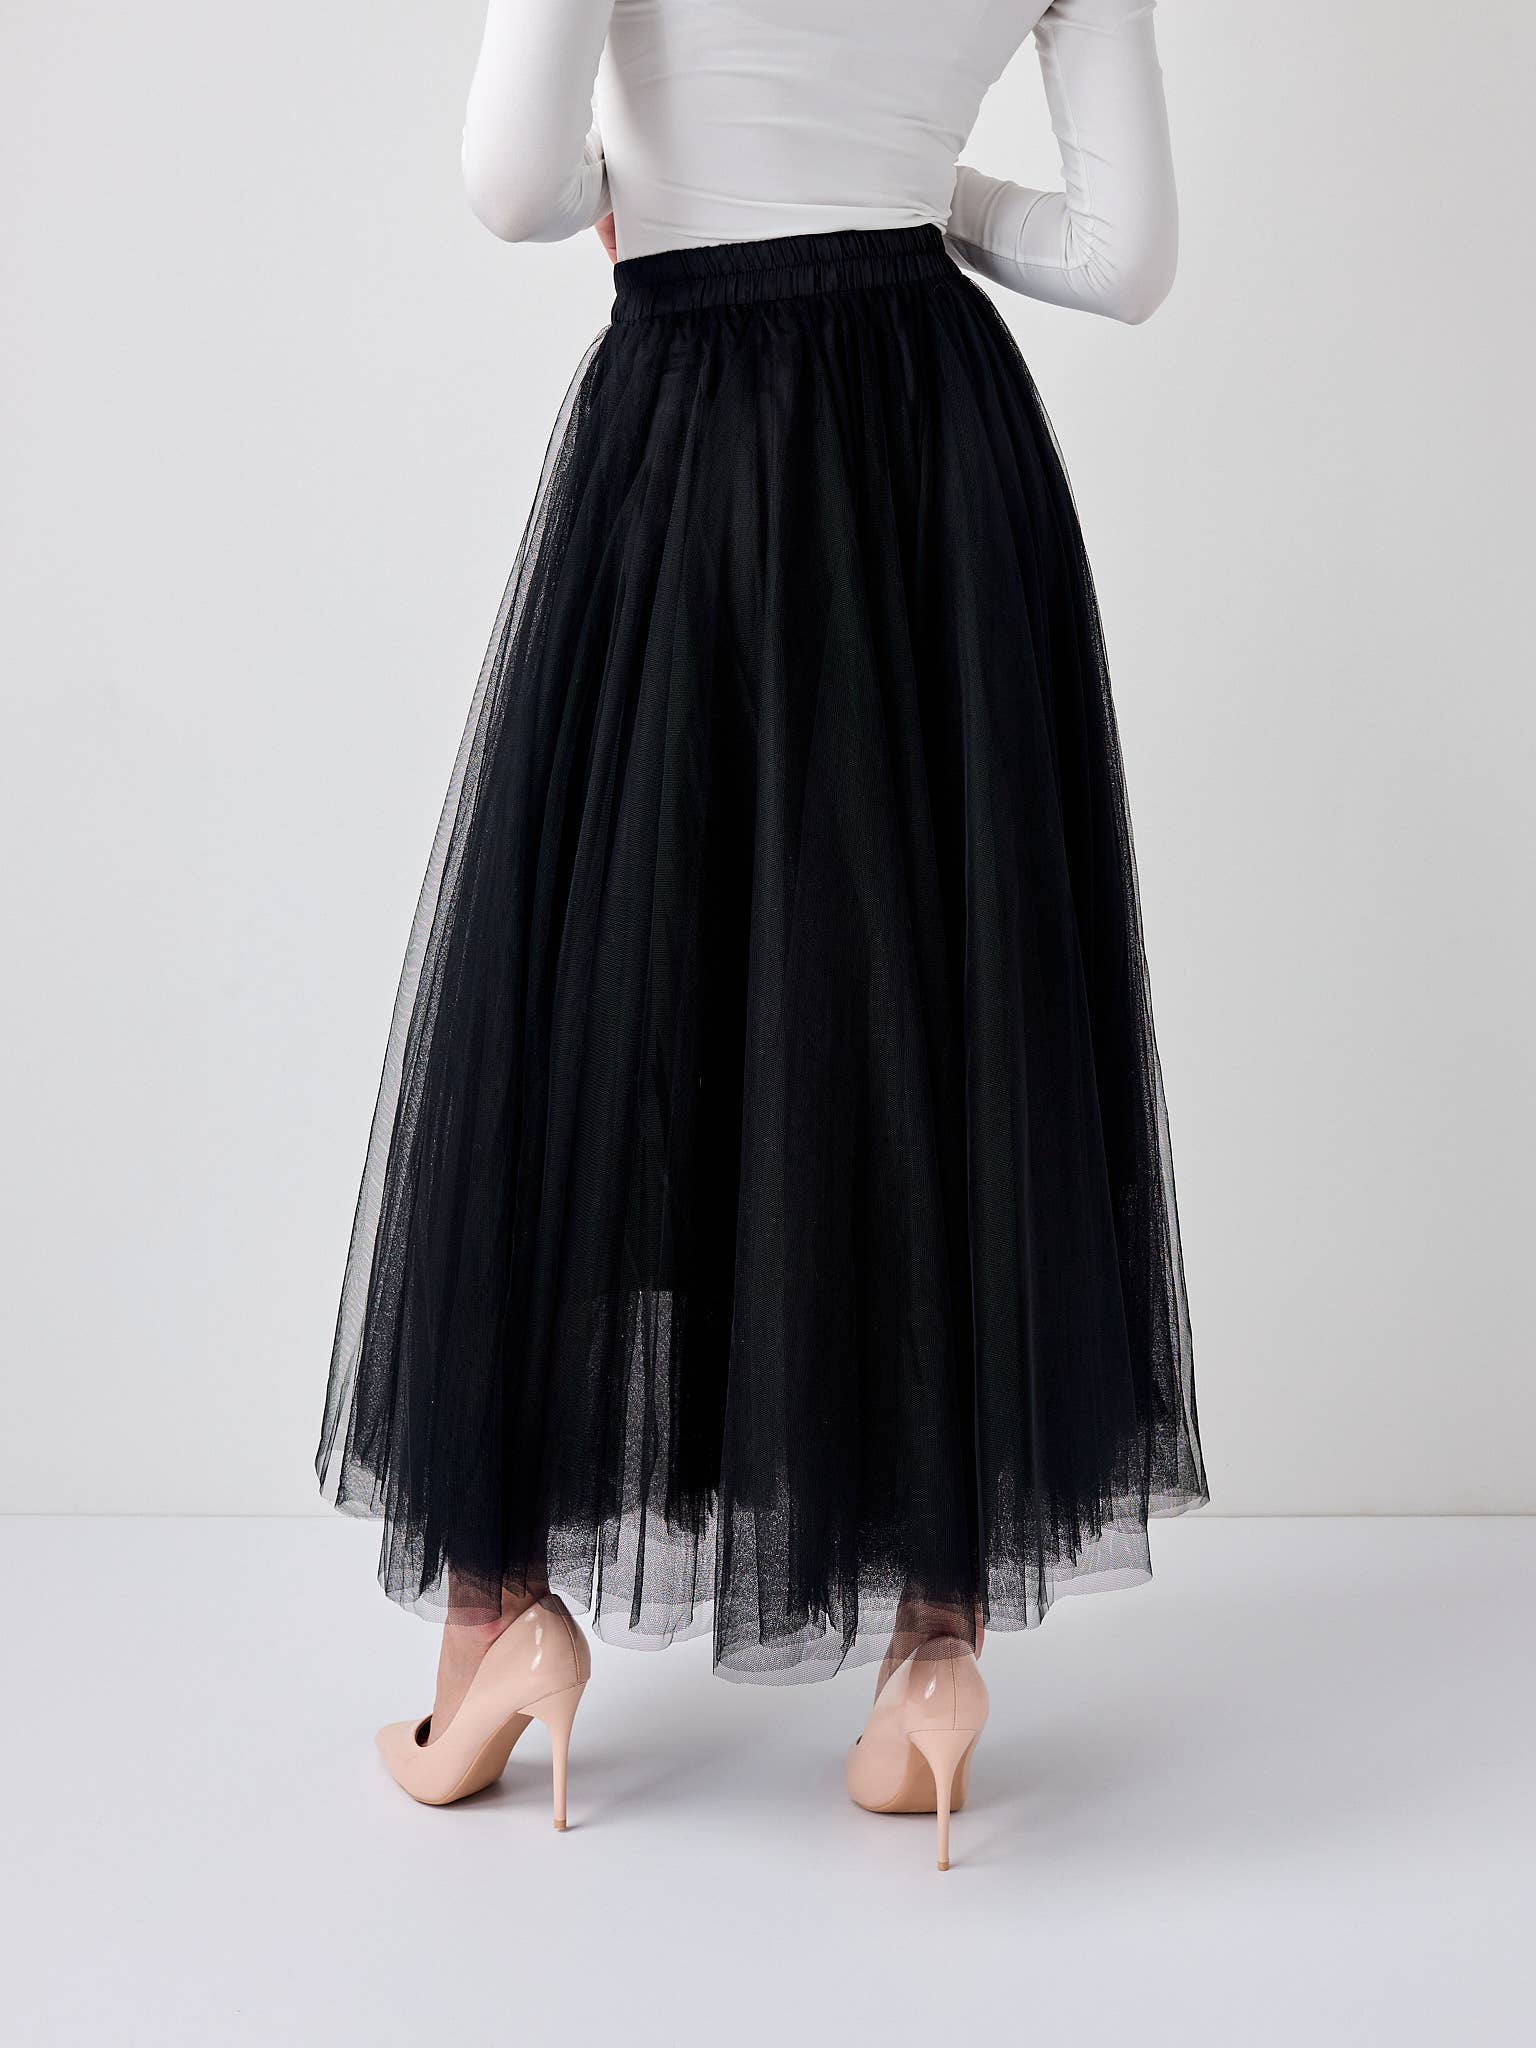 Aria tulle skirt - CK08077: 2 S/M - 2 M/L / Black - Out of the Blue